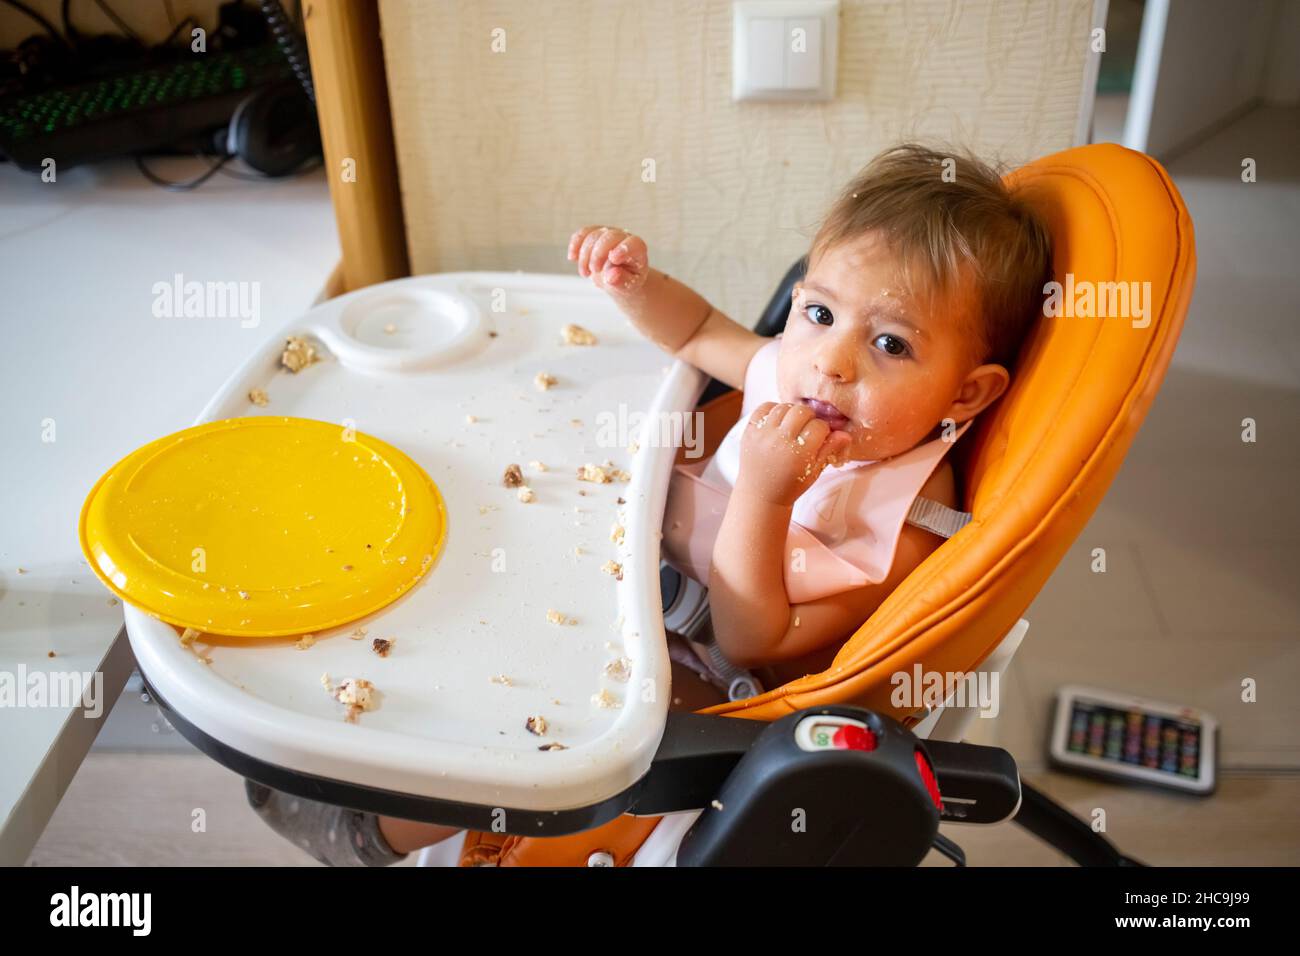 cute little infant baby eating in baby chair Stock Photo